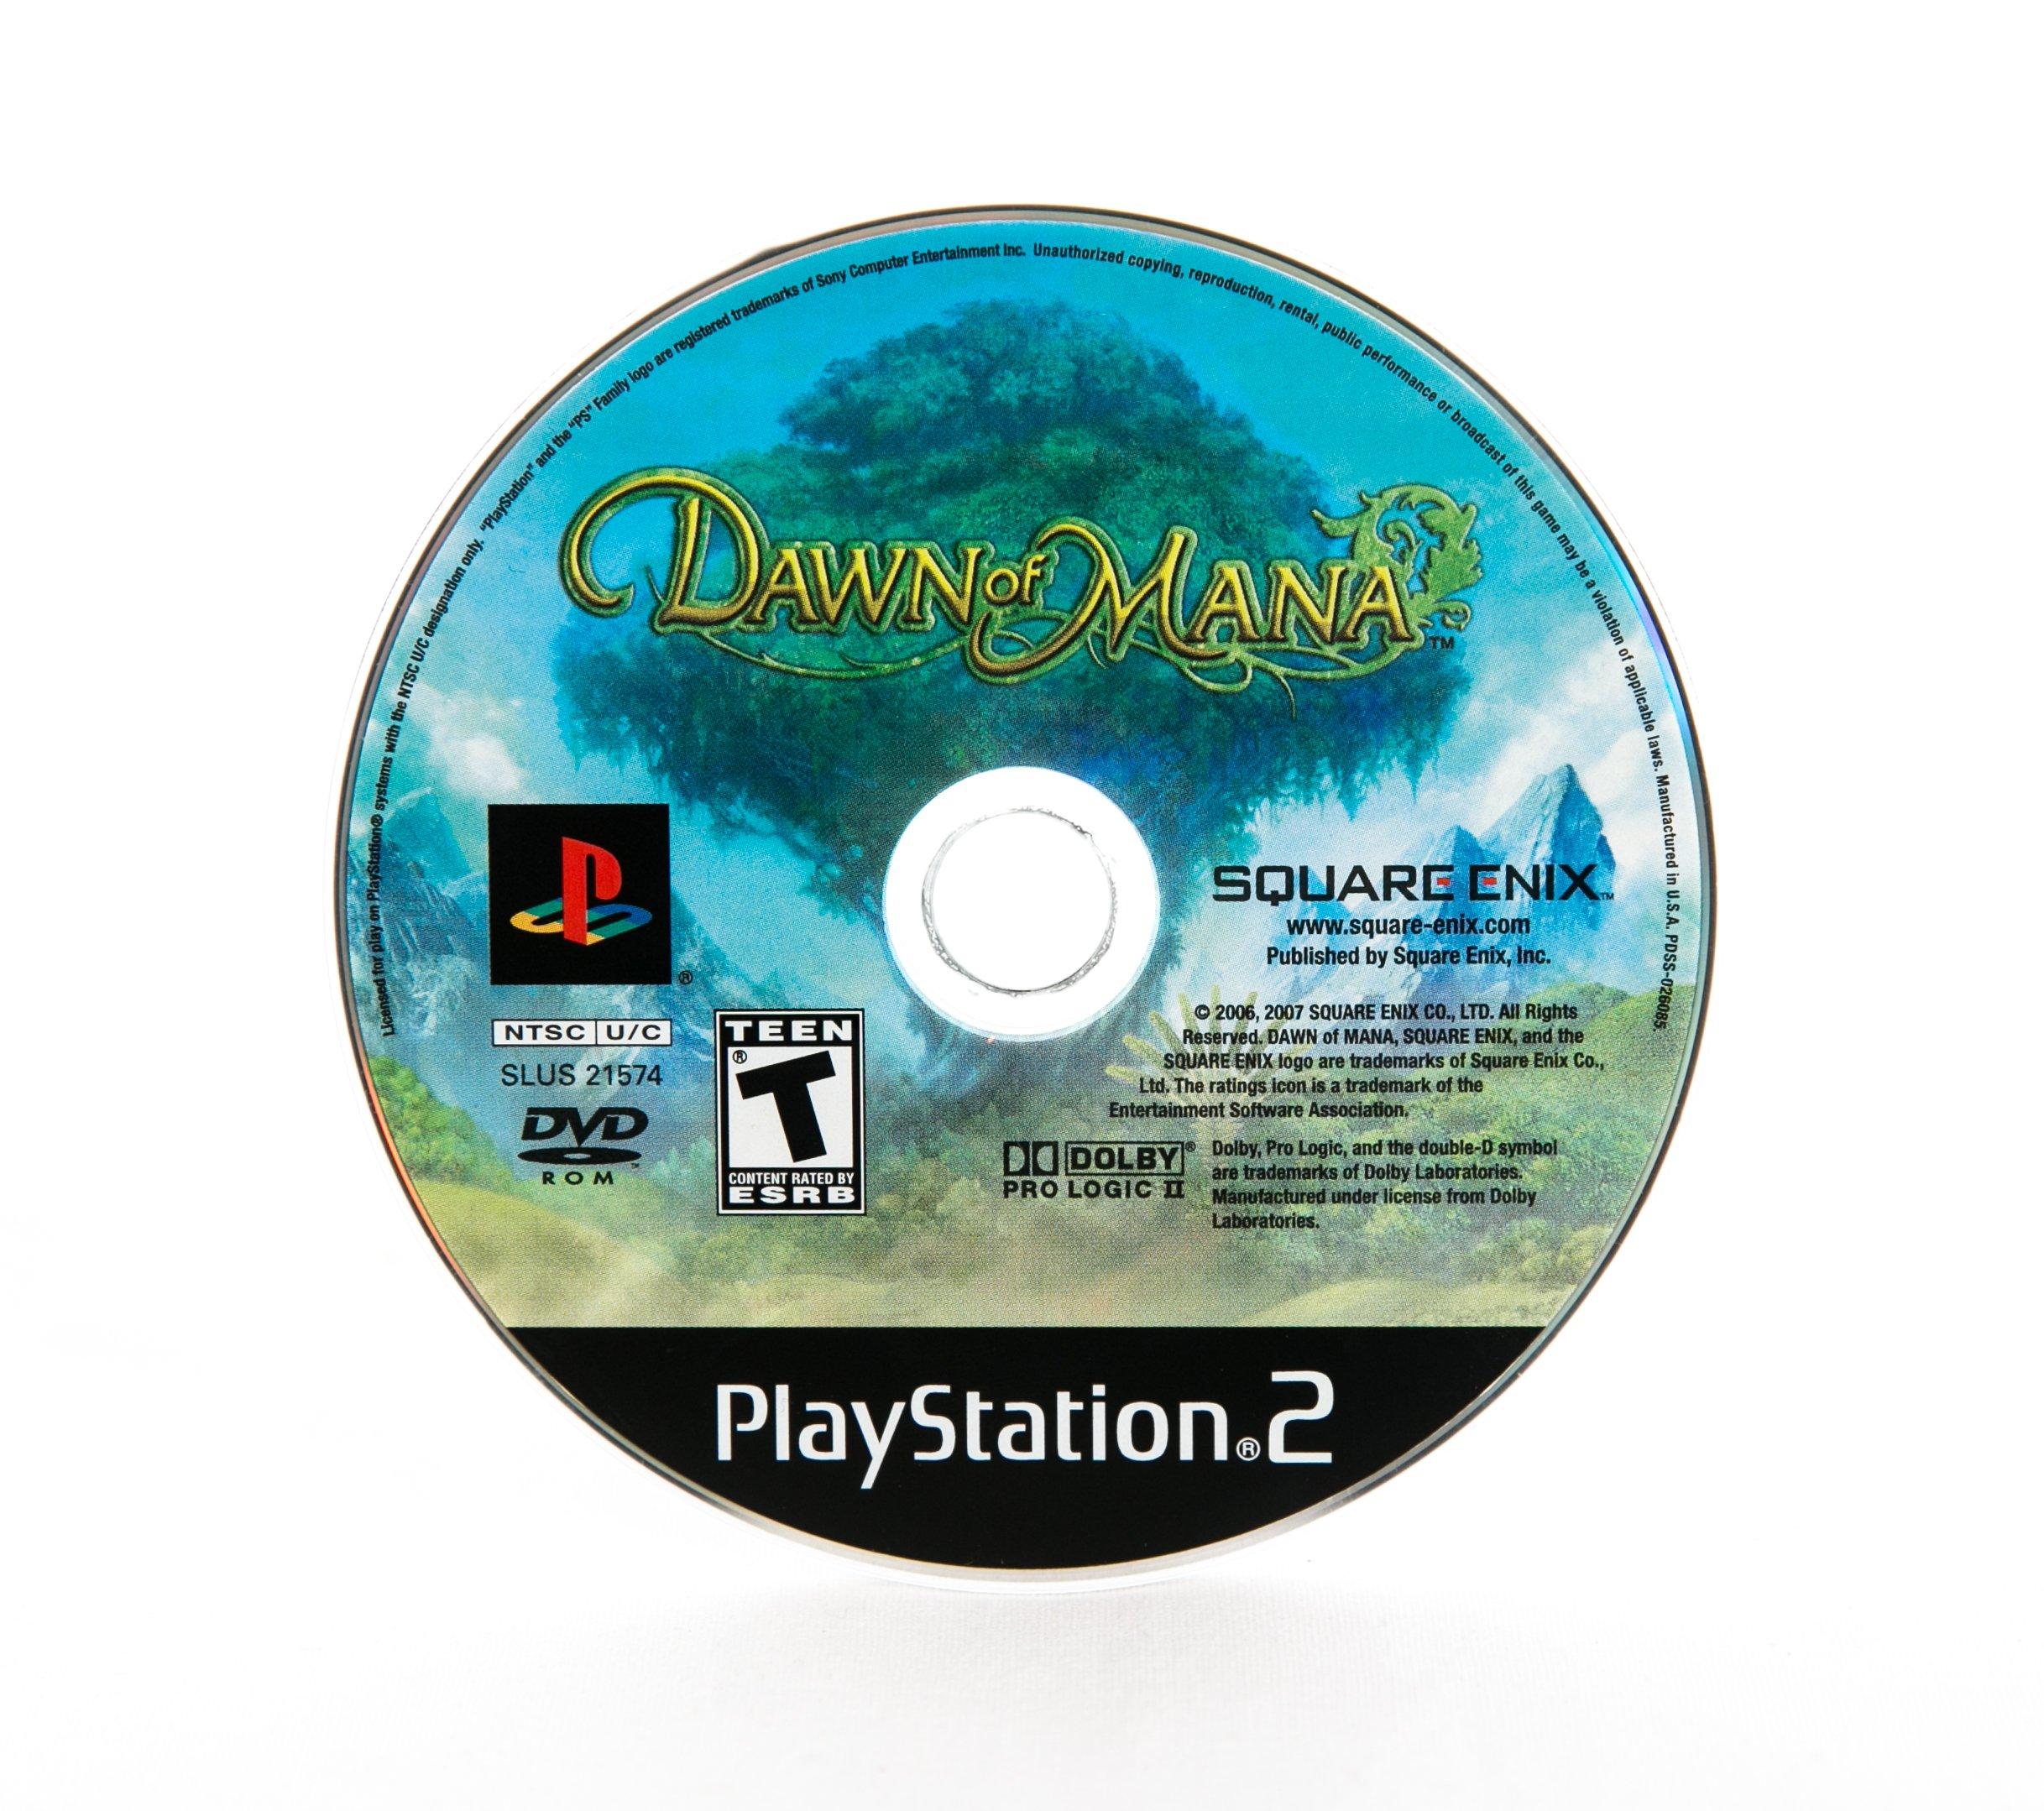 Dawn of Mana Playstation PS2 Game For Sale online